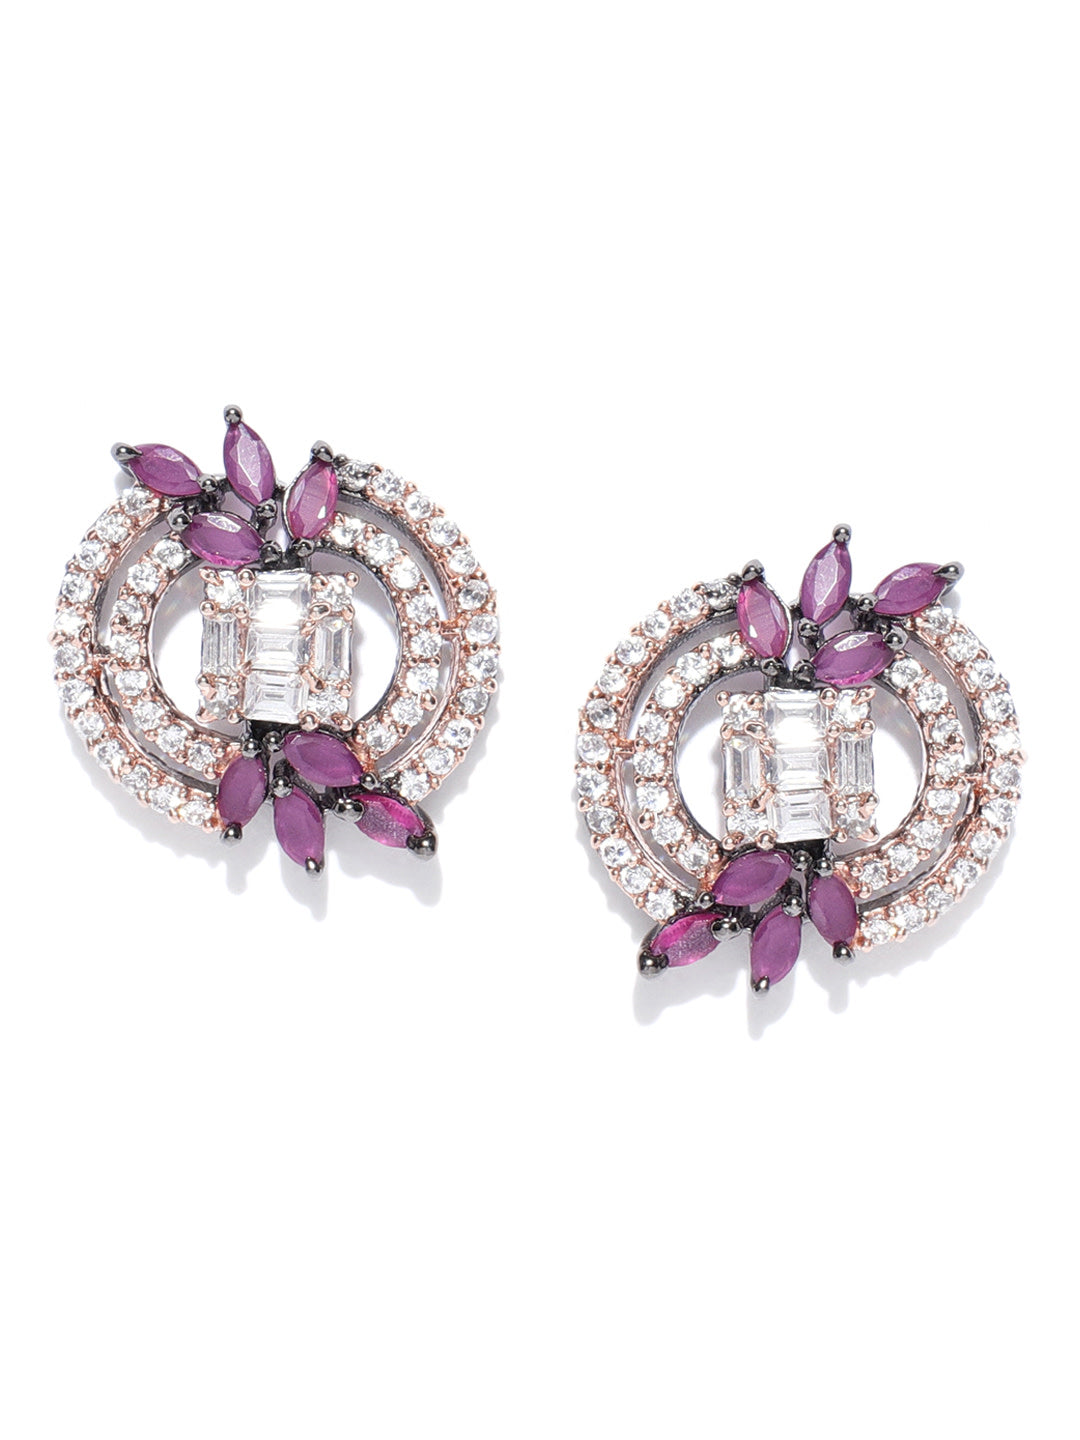 Stylish Round Shaped Pink And White American Diamond Stud Earring For Women And Girls